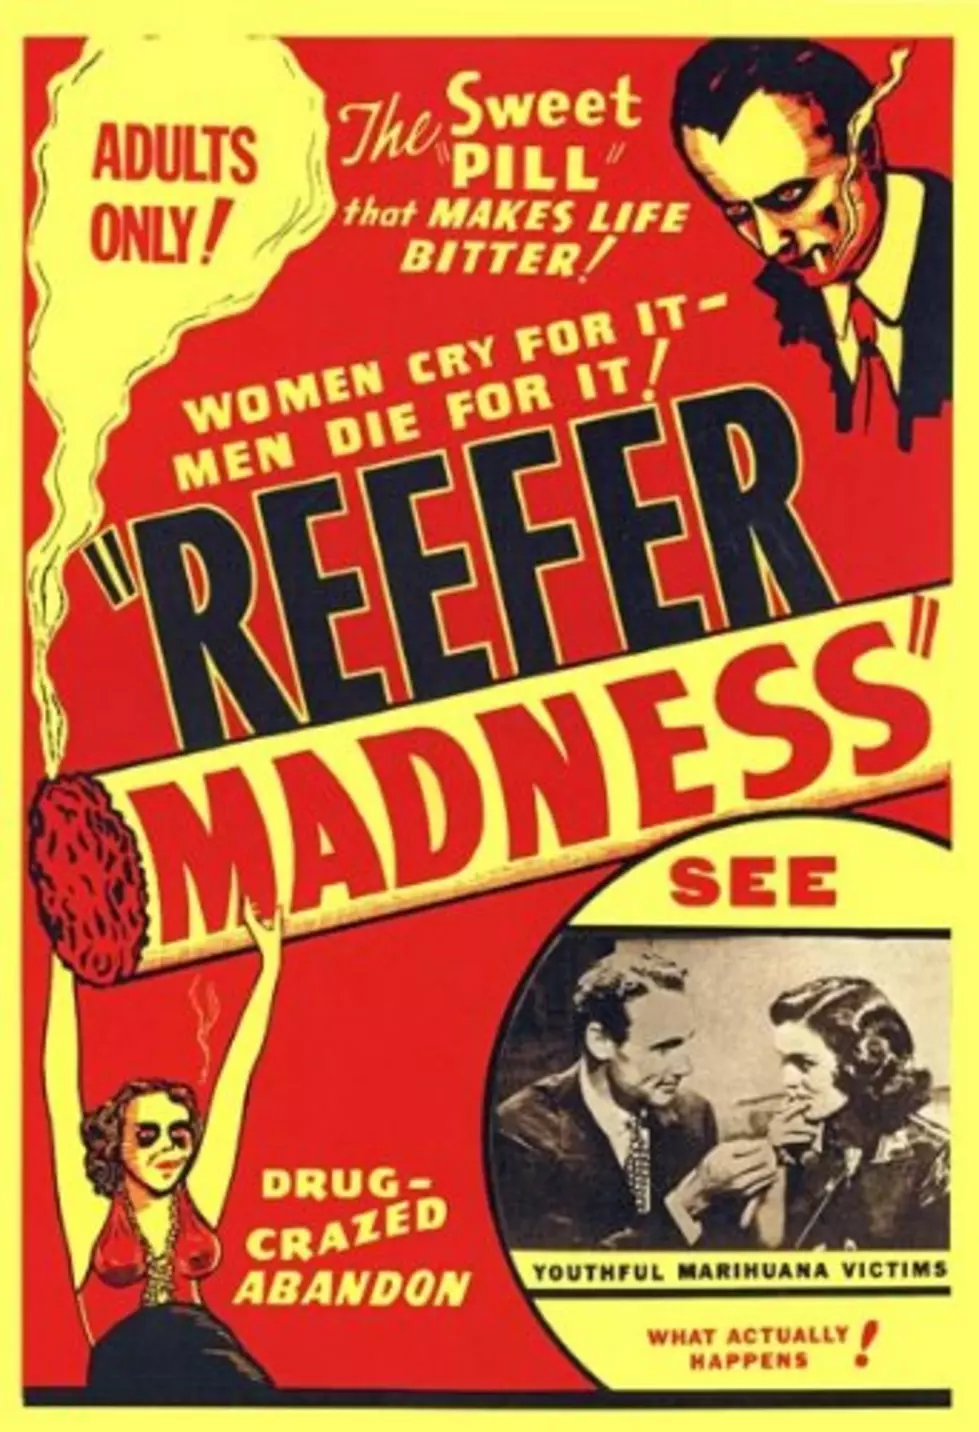 Spark Up With ‘Threefer Madness’ on 105.7 The Hawk